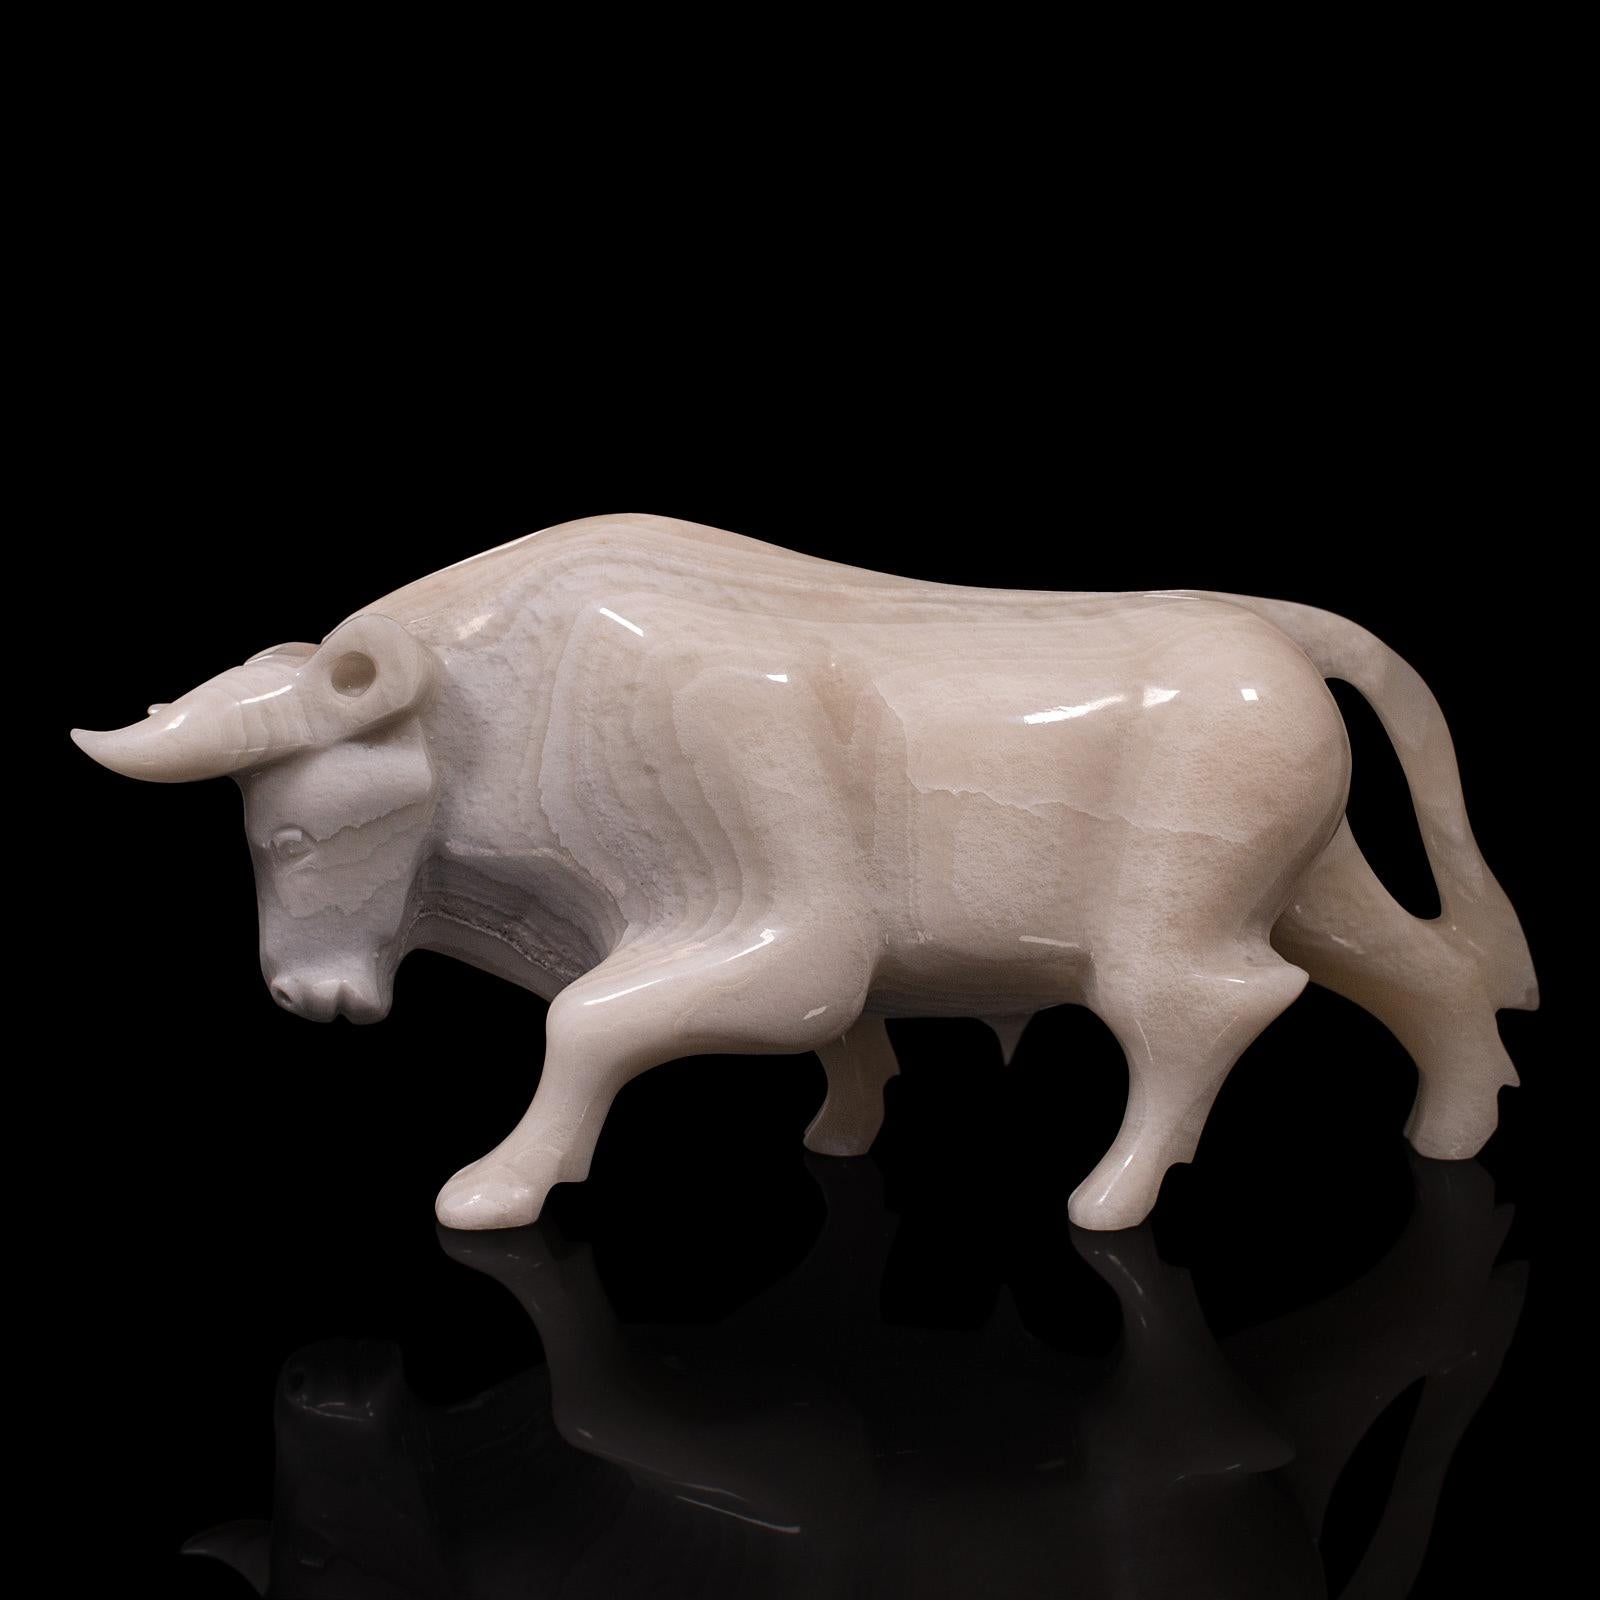 This is a vintage carved bull. An English, white onyx ornamental animal display figure, dating to the mid 20th century, circa 1950.

Striking mid-century craftsmanship and material quality
Displays a desirable aged patina in good order